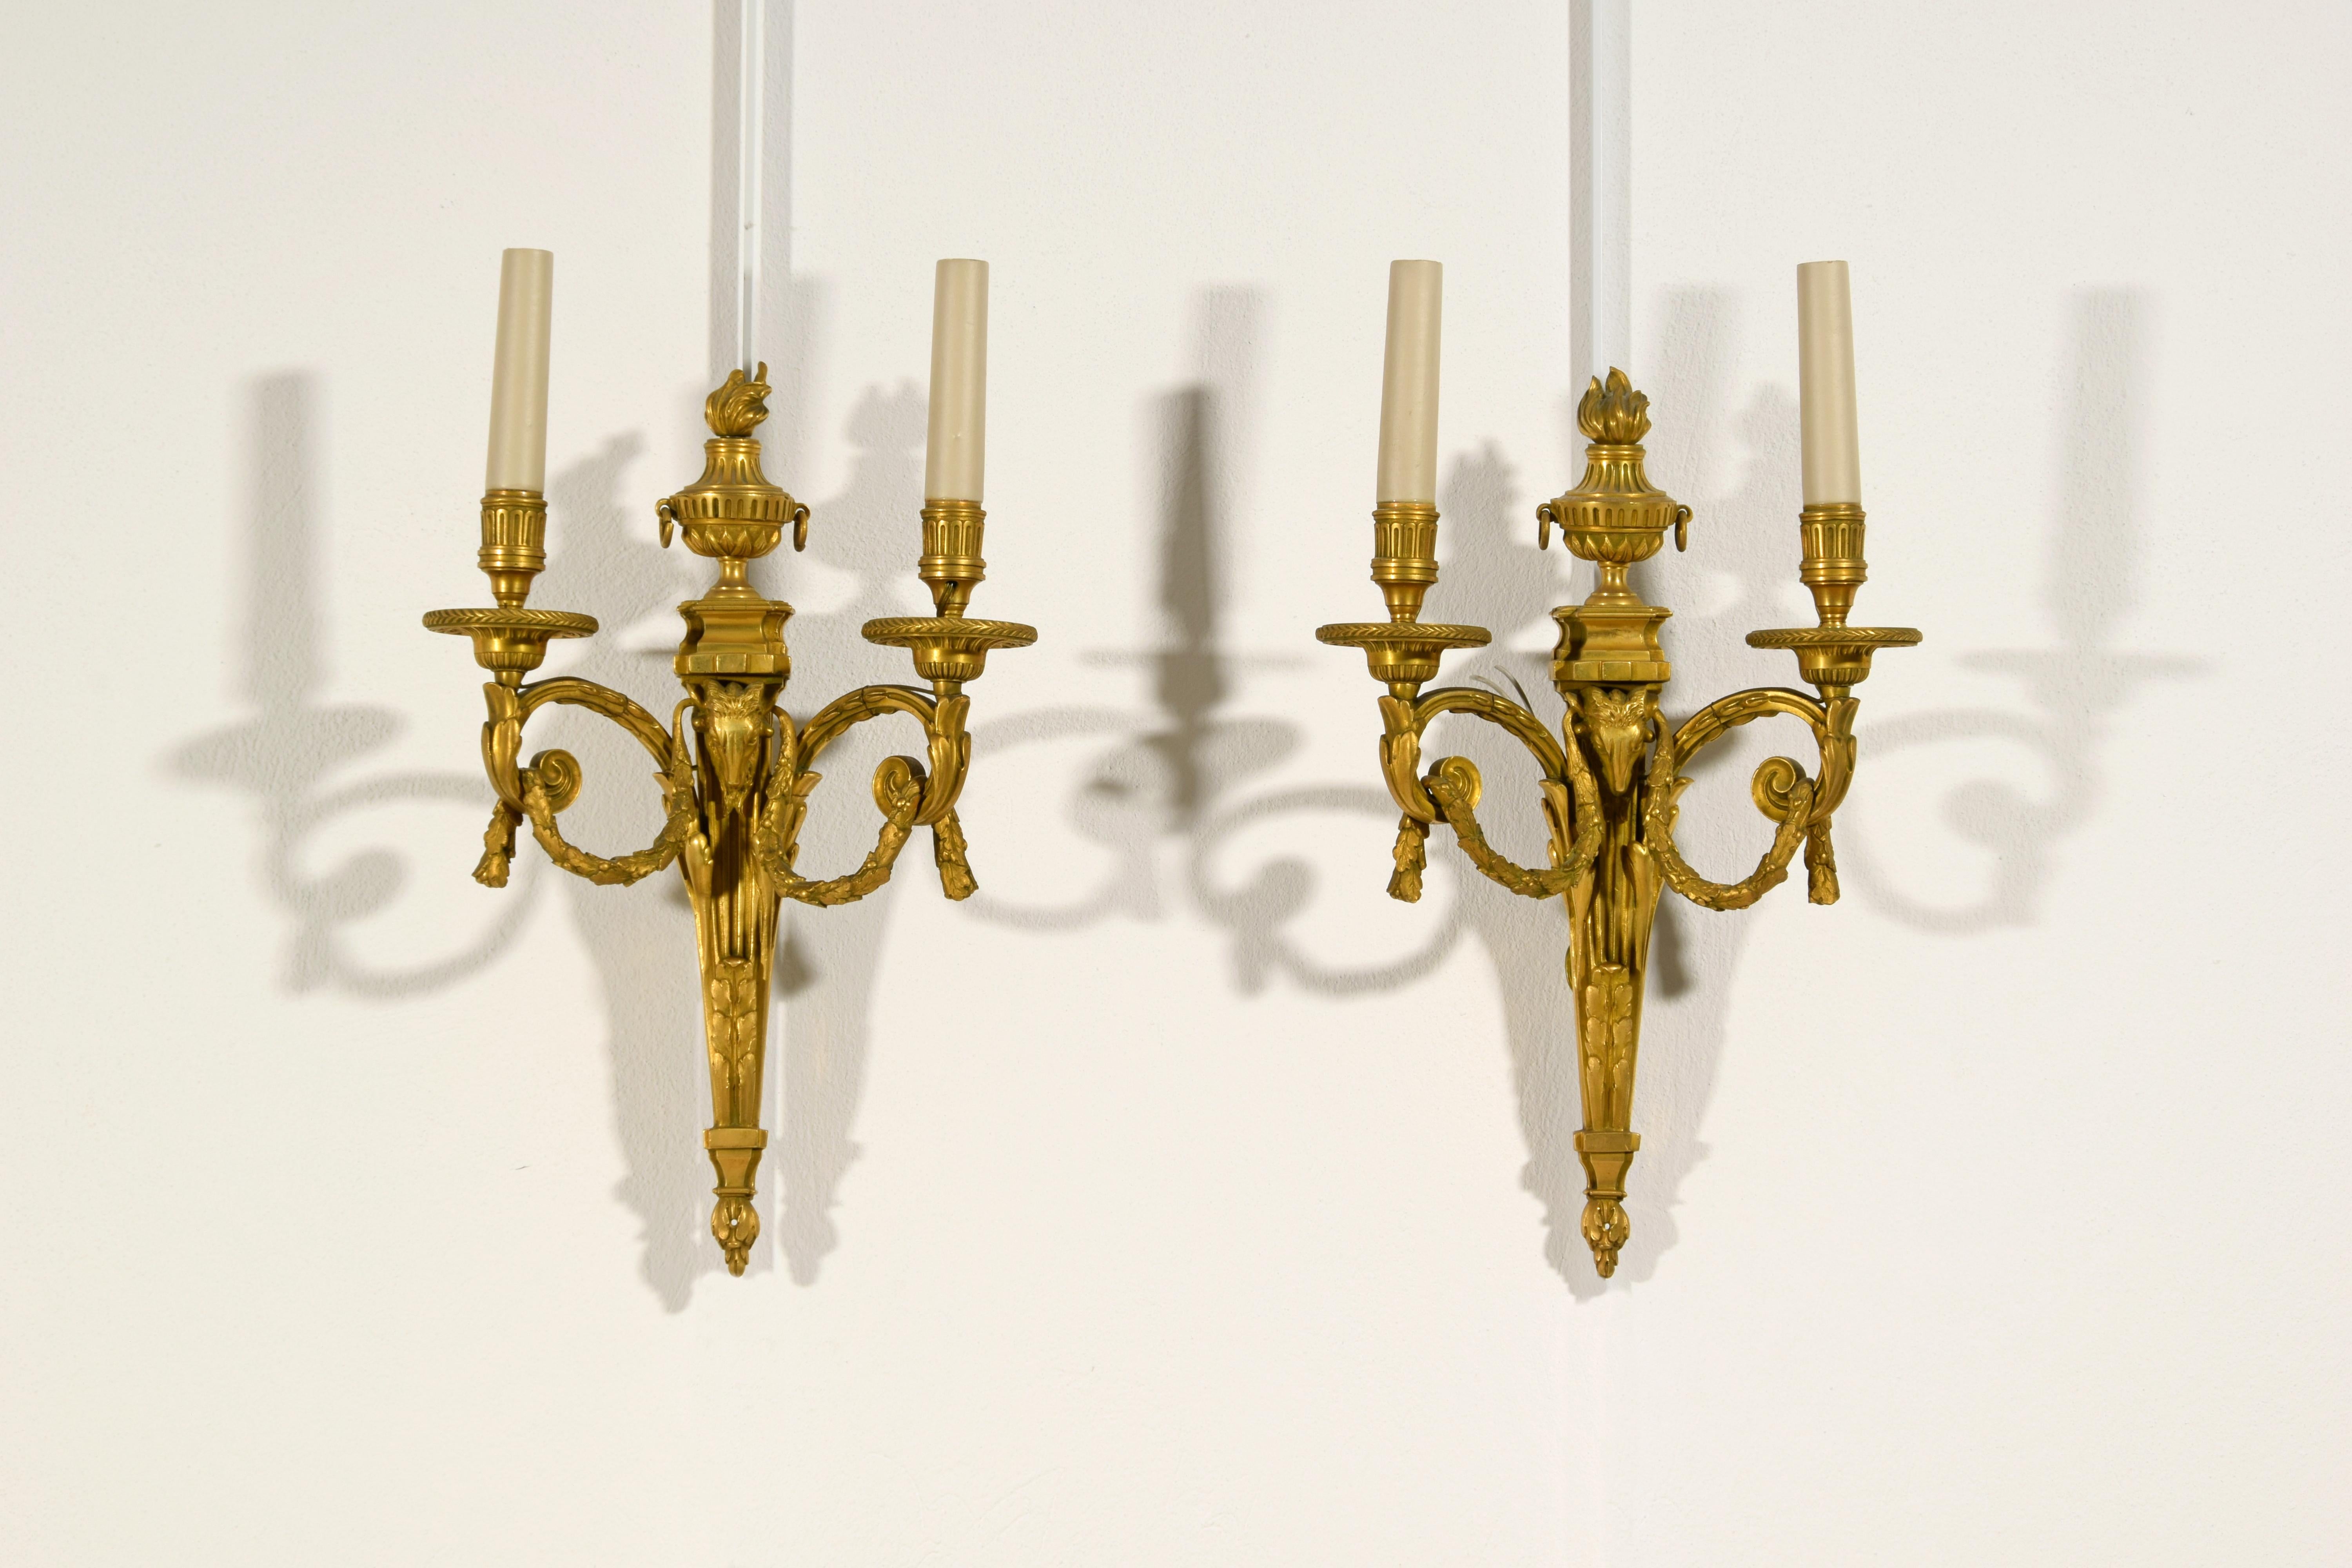 20th Century, Pair of French Gilt Bronze Two-light Sconces

Measurements: H max with candle 43 cm, H max bronze (at the flame of the brazier) 39 cm; W 26 x D 12 cm

This elegant pair of sconces was made in France in the early 20th century, according